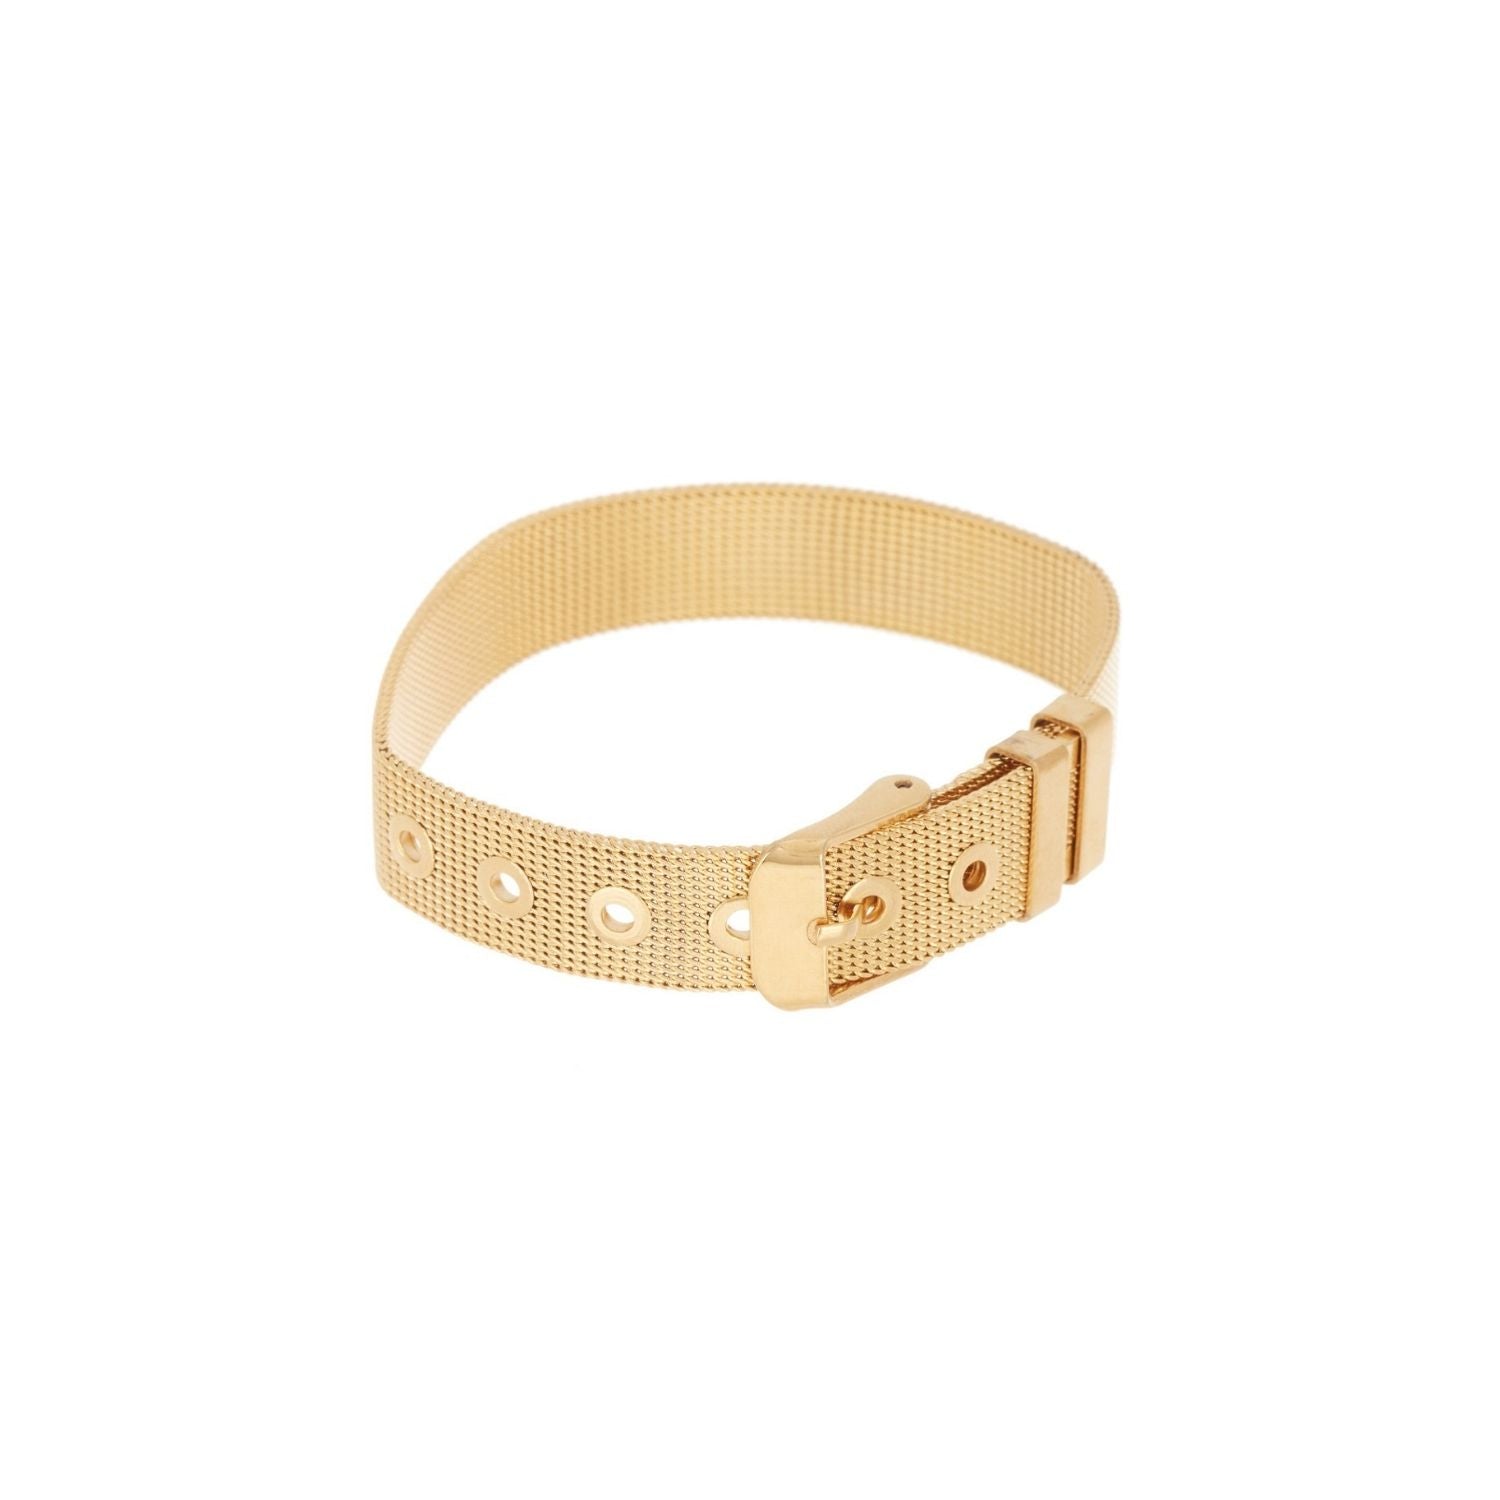 Gold Plated Stainless Steel Spine Bracelet — WE ARE ALL SMITH